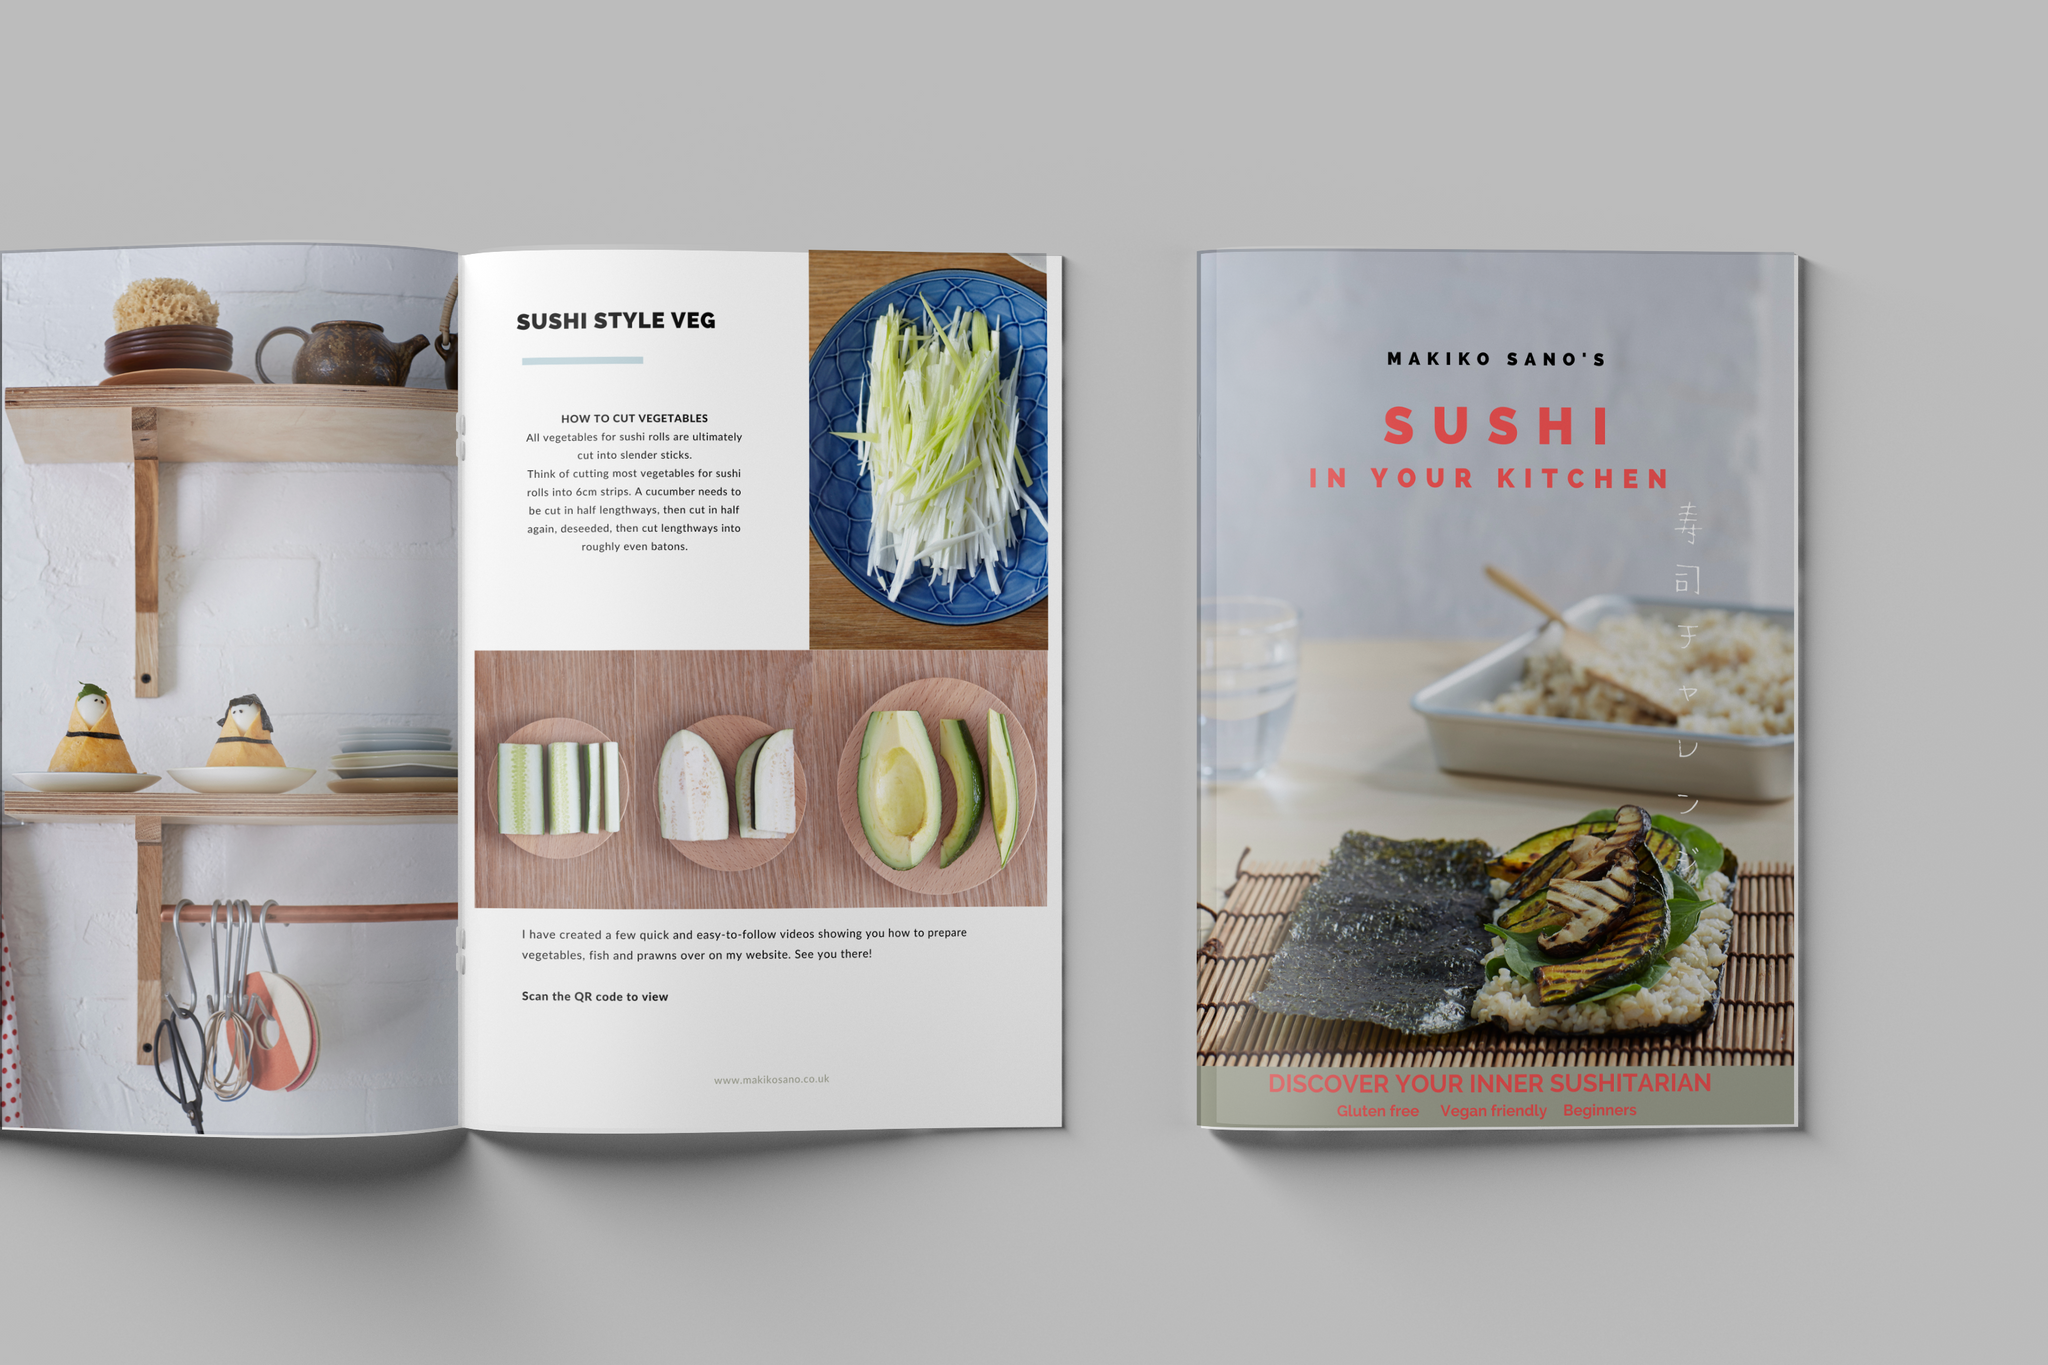 Step by Step how to - Sushi in your kitchen